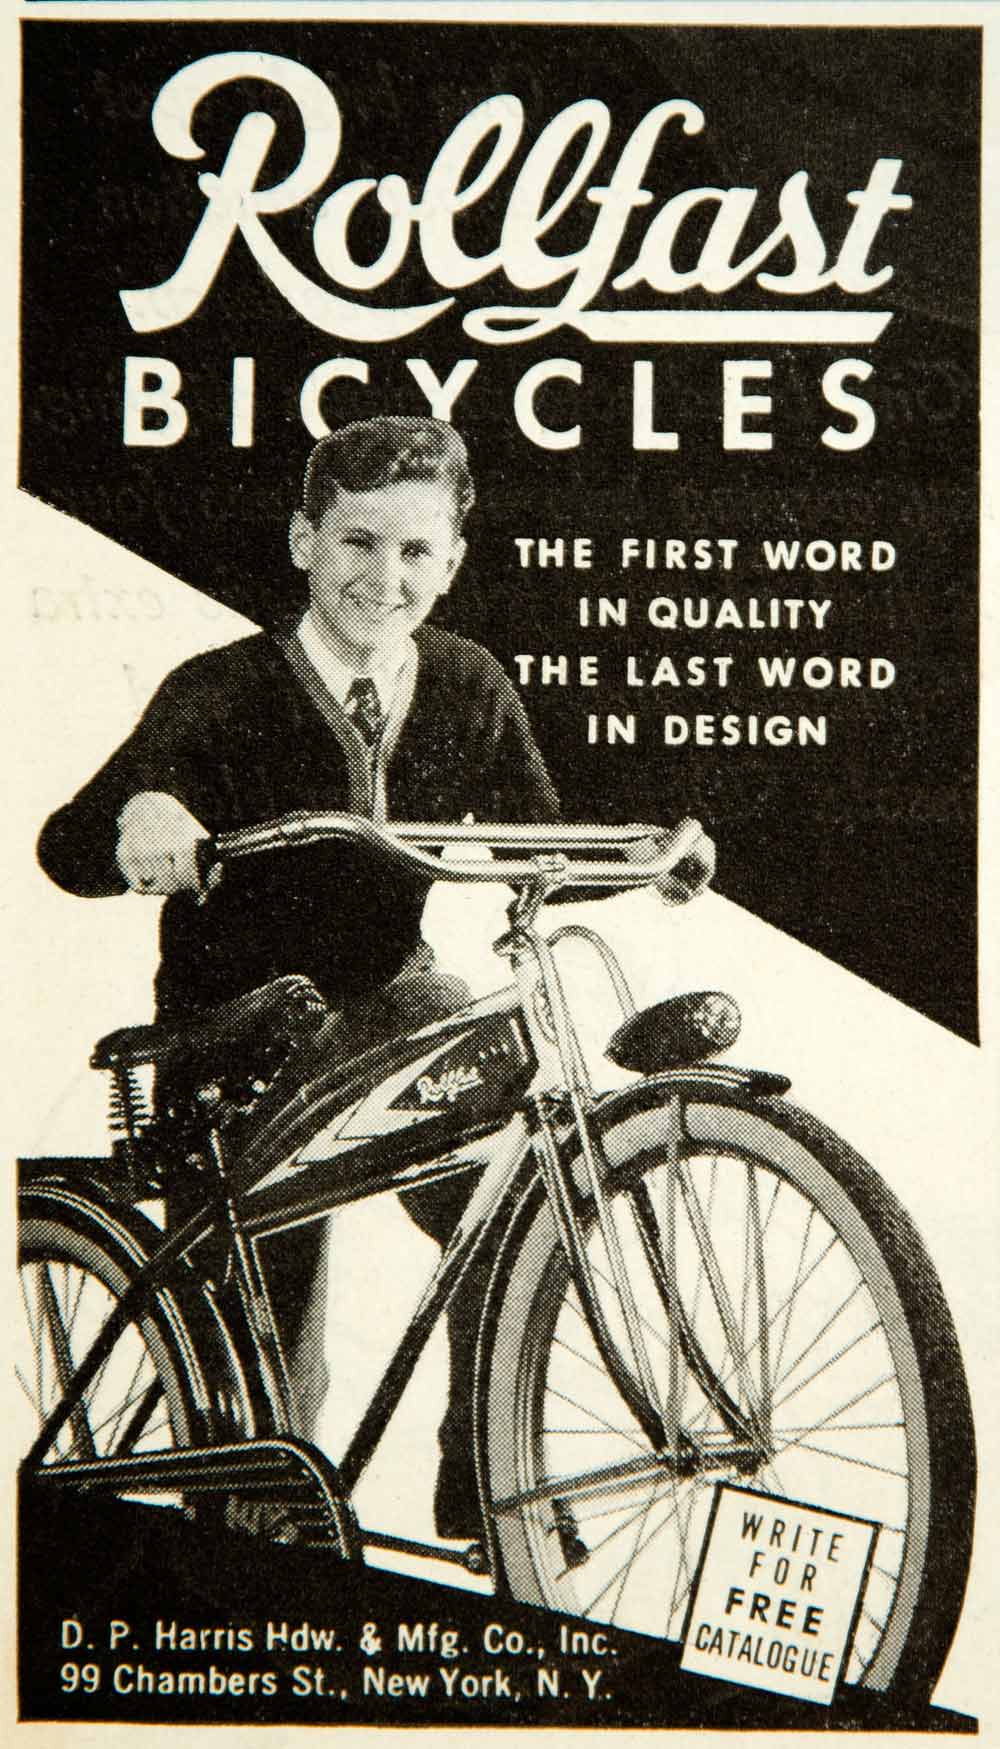 1937 Ad DP Harris Hardware 99 Chambers St NY Rollfast Bicycles YAB3